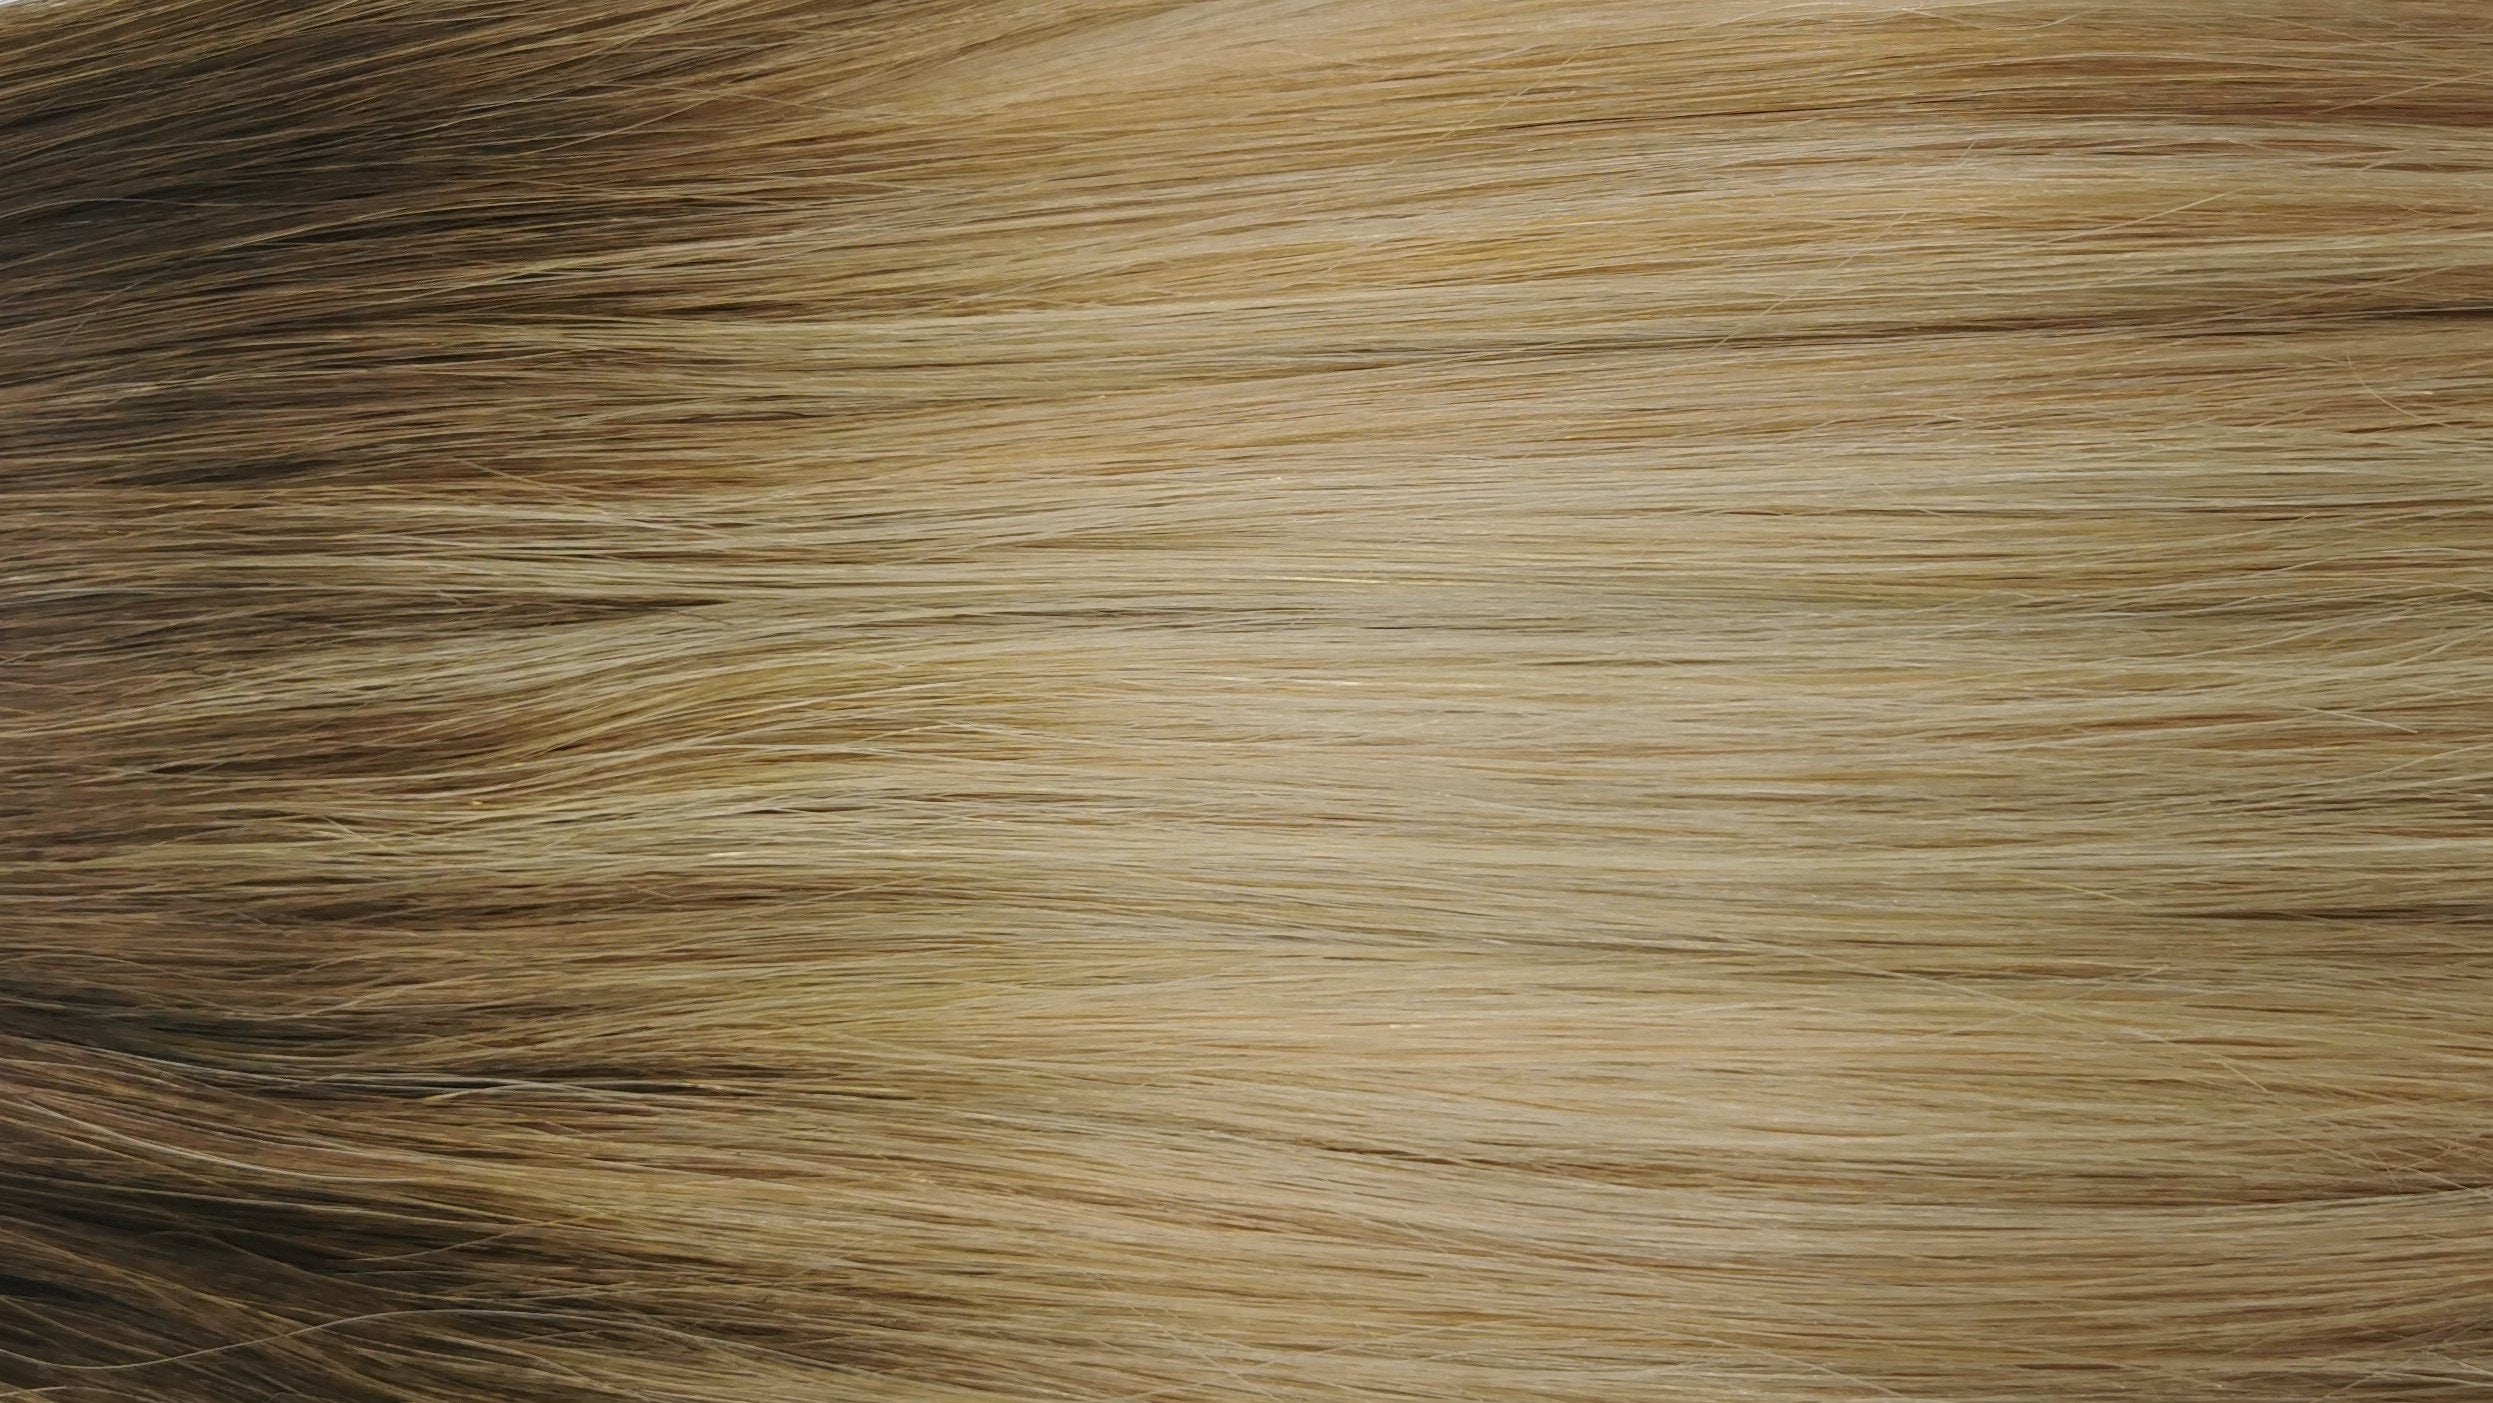 Rania Tape In Extensions - Balayage Gold Coast 50g - Creata Beauty - Professional Beauty Products